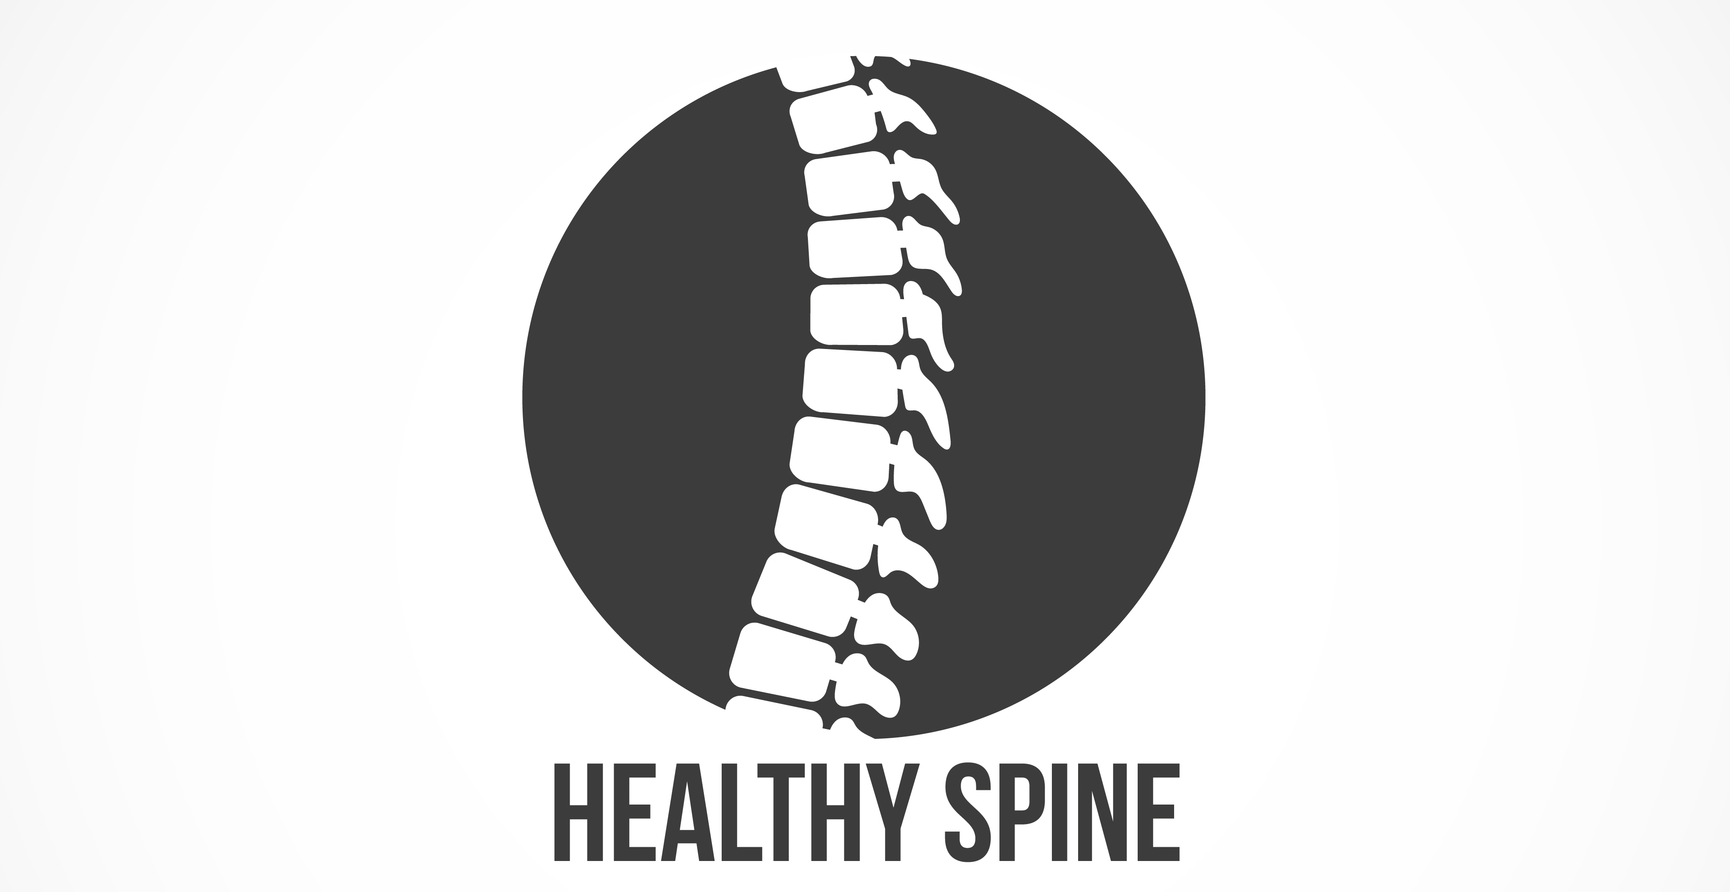 Importance of The Spine